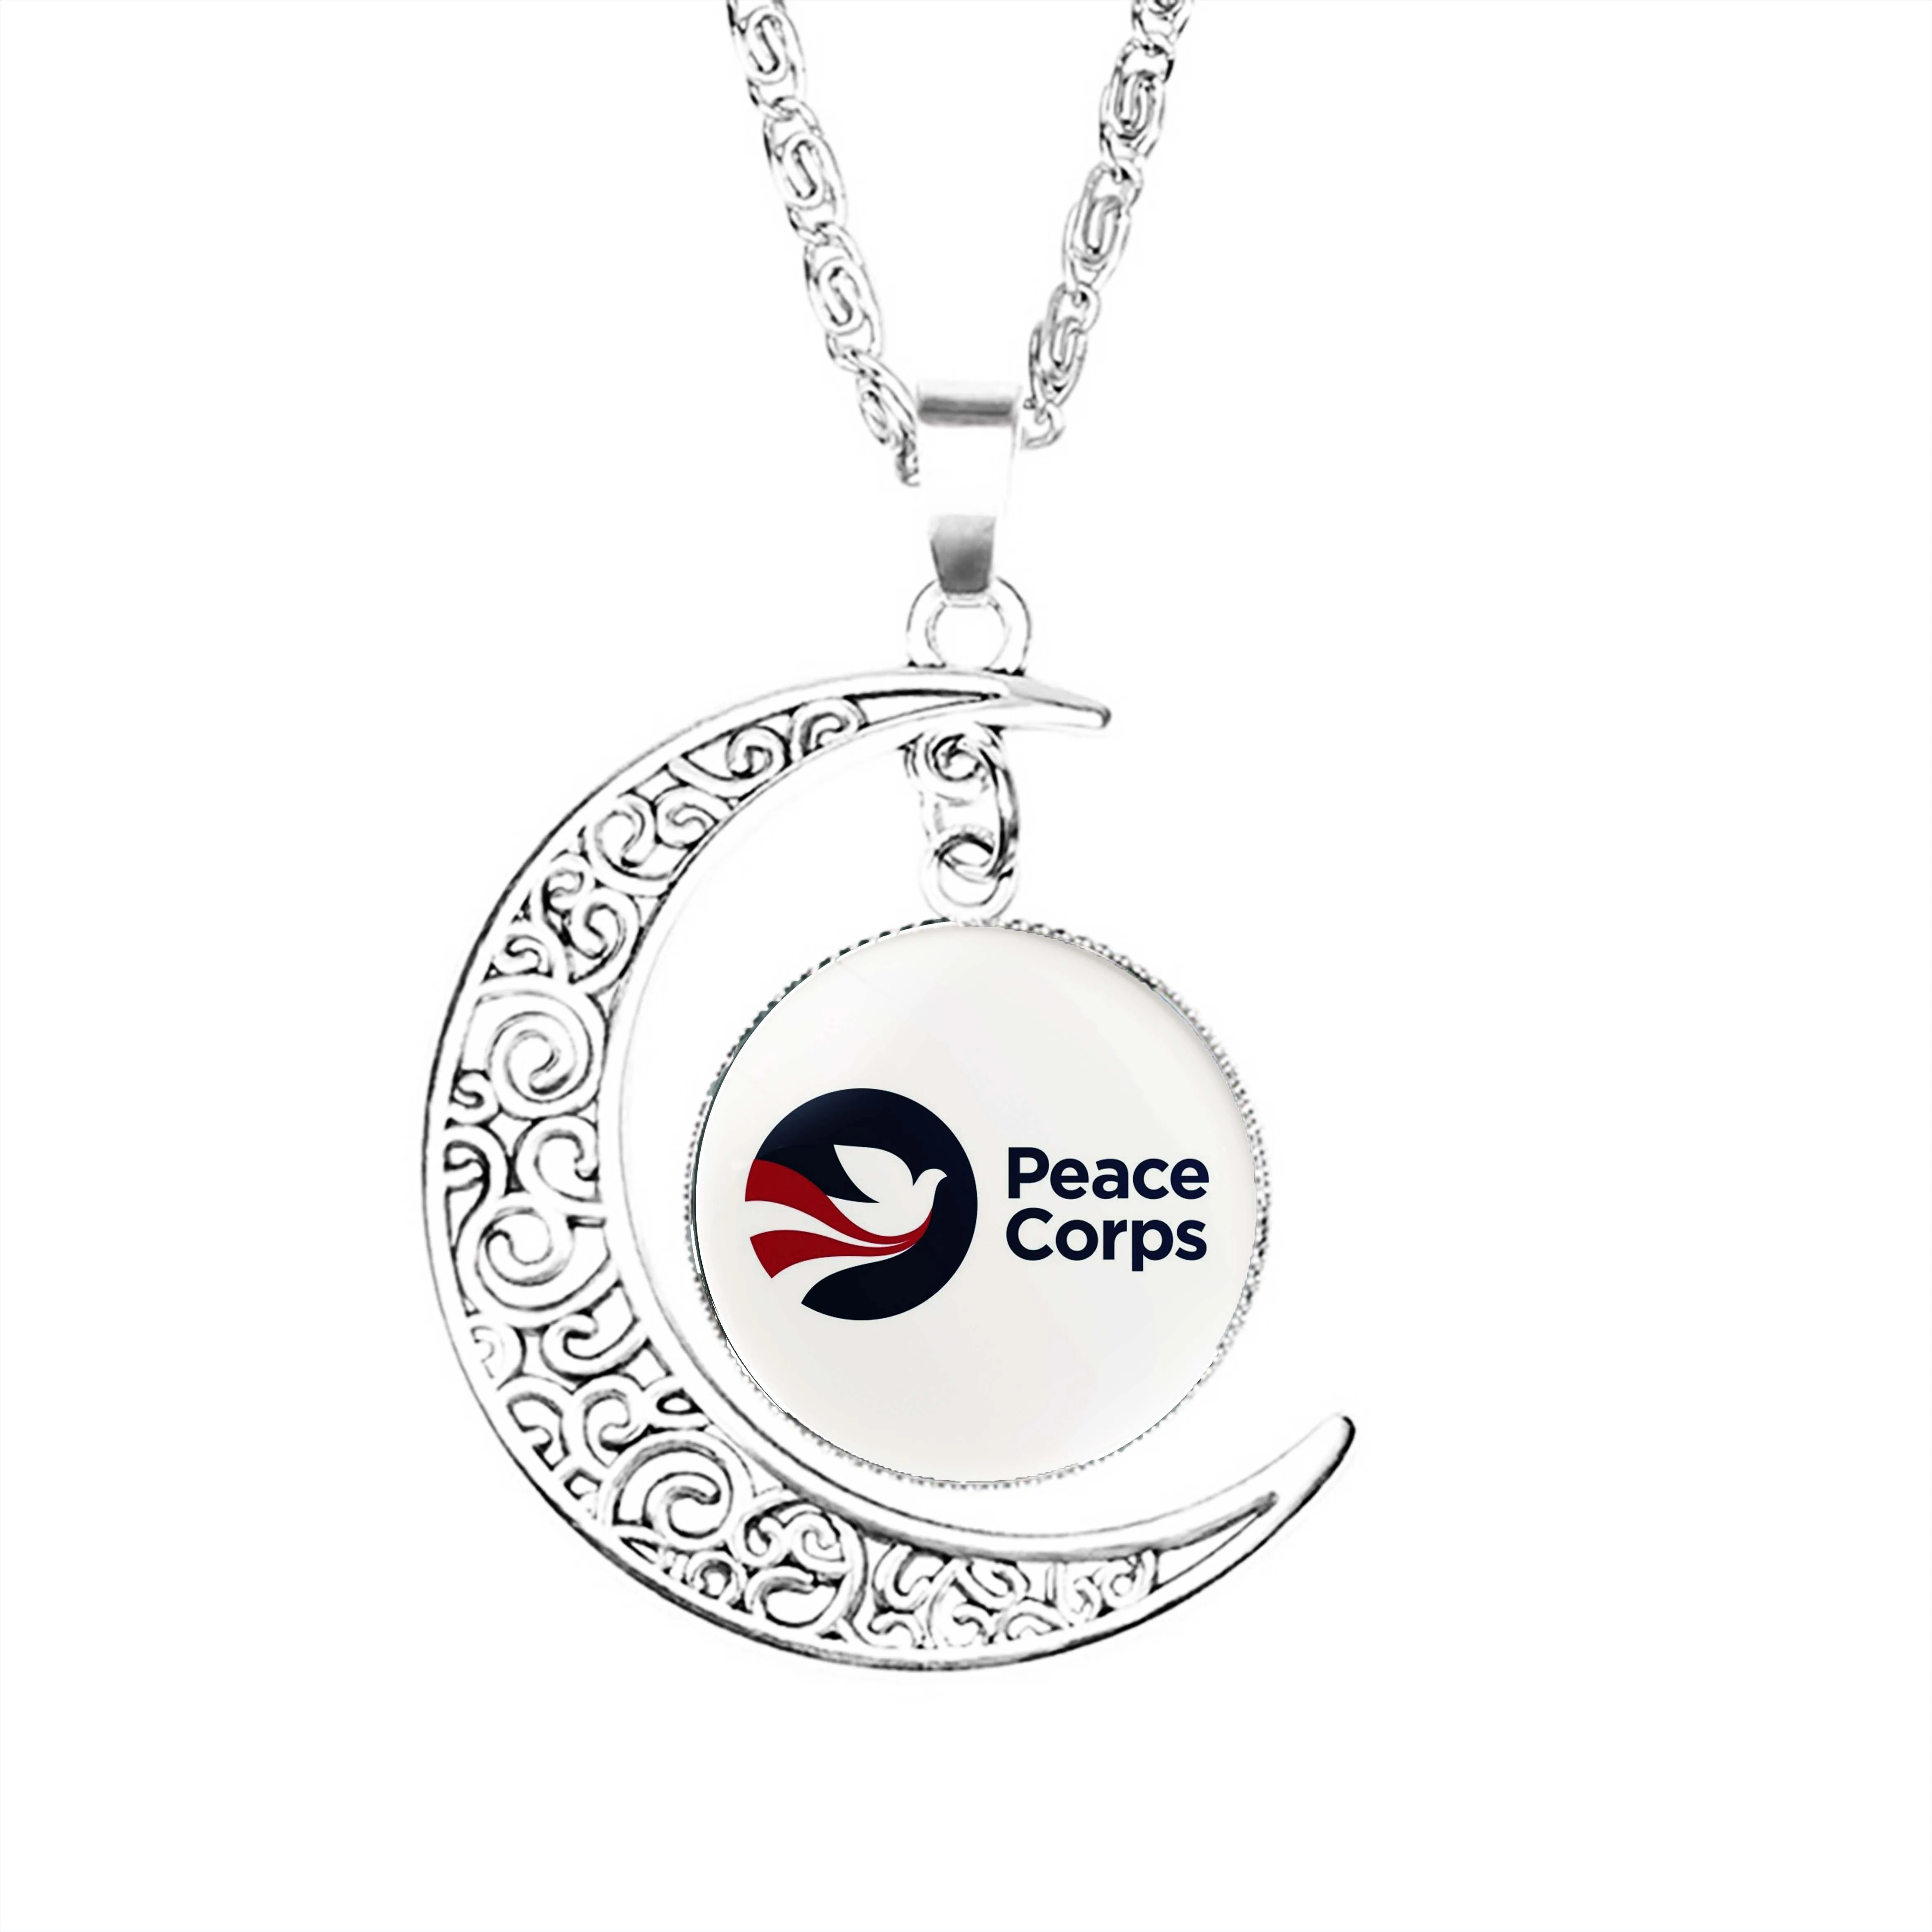 

Peace Corps Moon Necklace Men Women Charm Dome Crescent Jewelry Boy Girls Fashion Stainless Steel Pendant Glass Chain Gifts